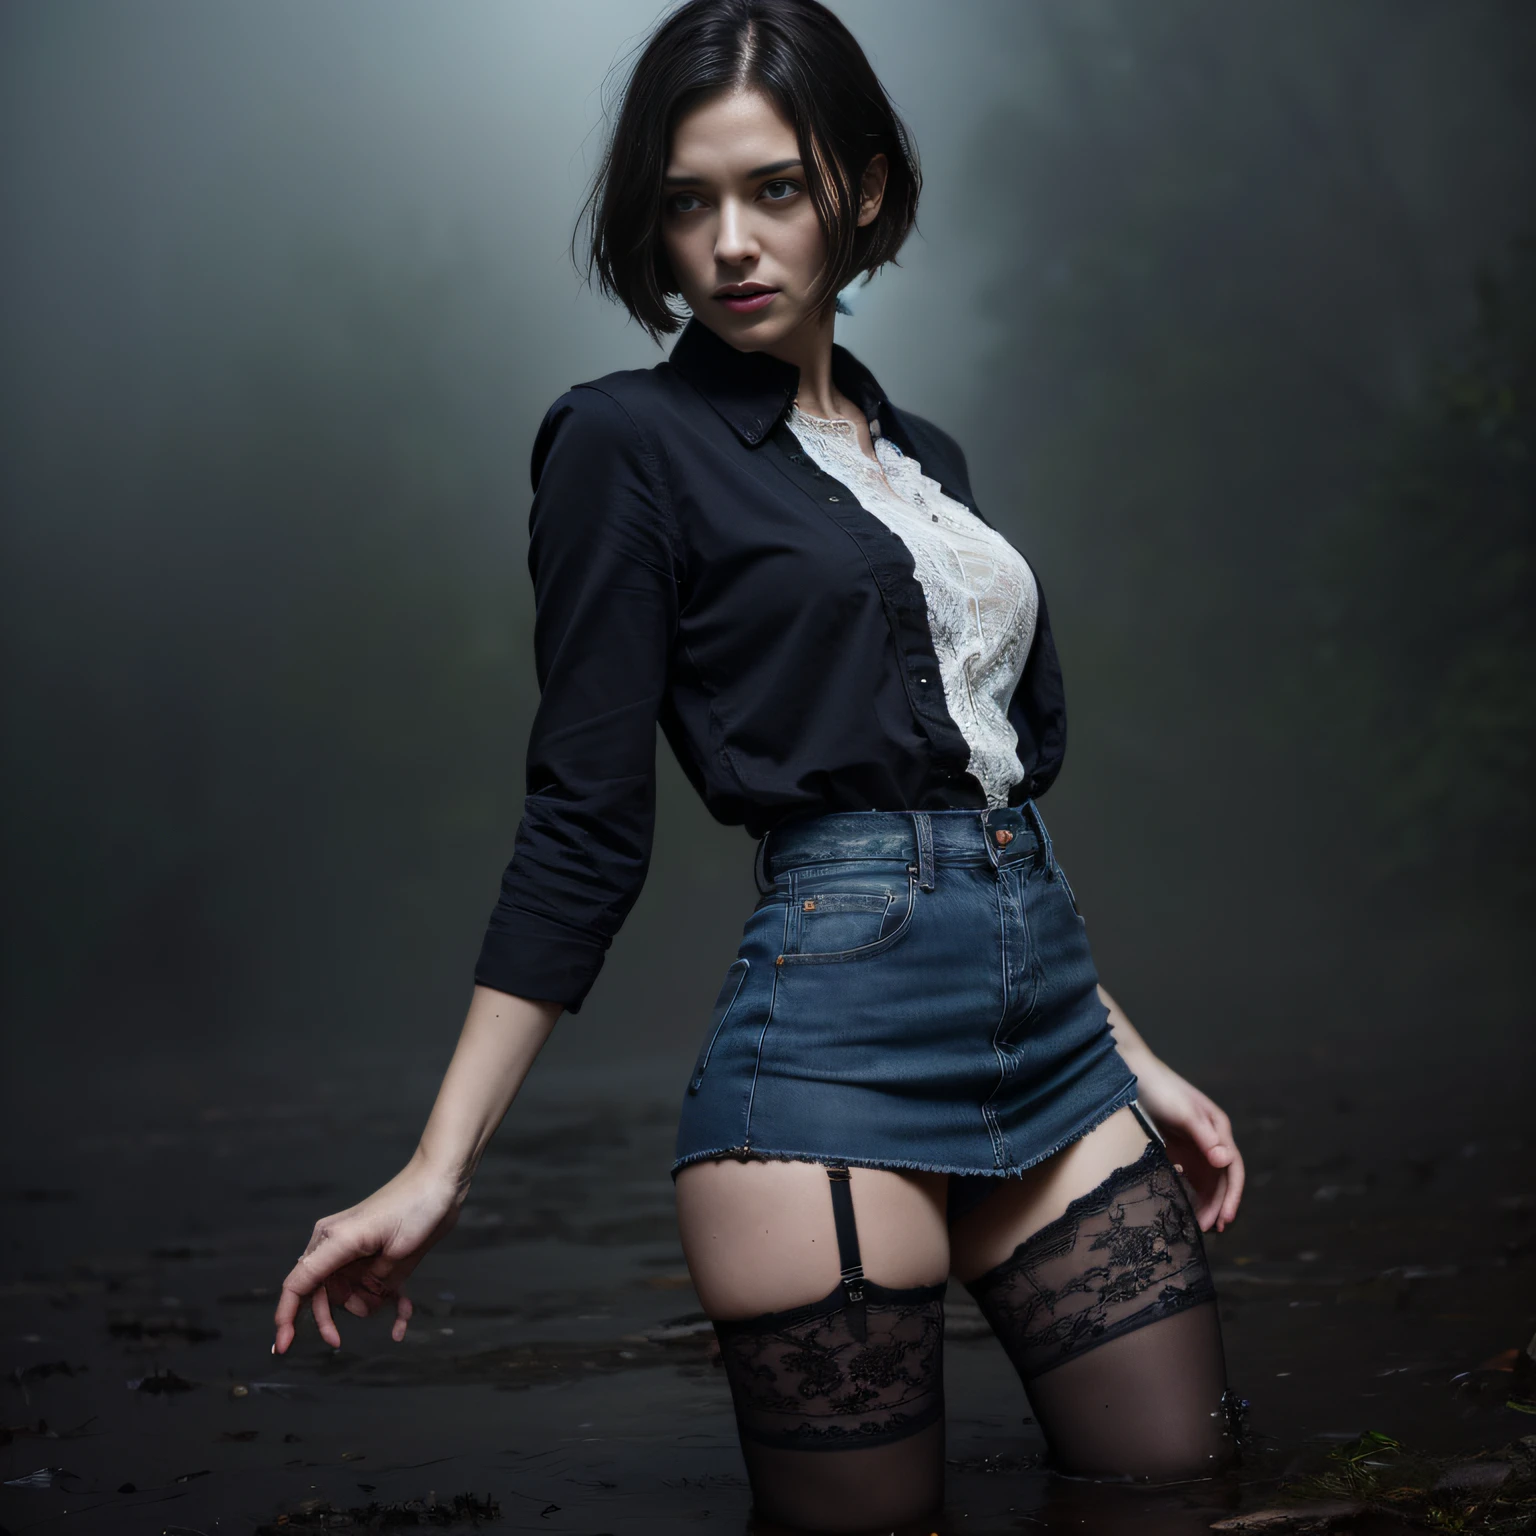 "(Best Quality,hight resolution:1.2),The woman,Expressive wrinkles,Bob haircut,jeans skirt,lace blouse,(lace stockings with garters), standingn, (drowning in a bog:1.2),long eyelashes,expression of despair,Dark and moody lighting, terror. The pose expresses panic and awkwardness"